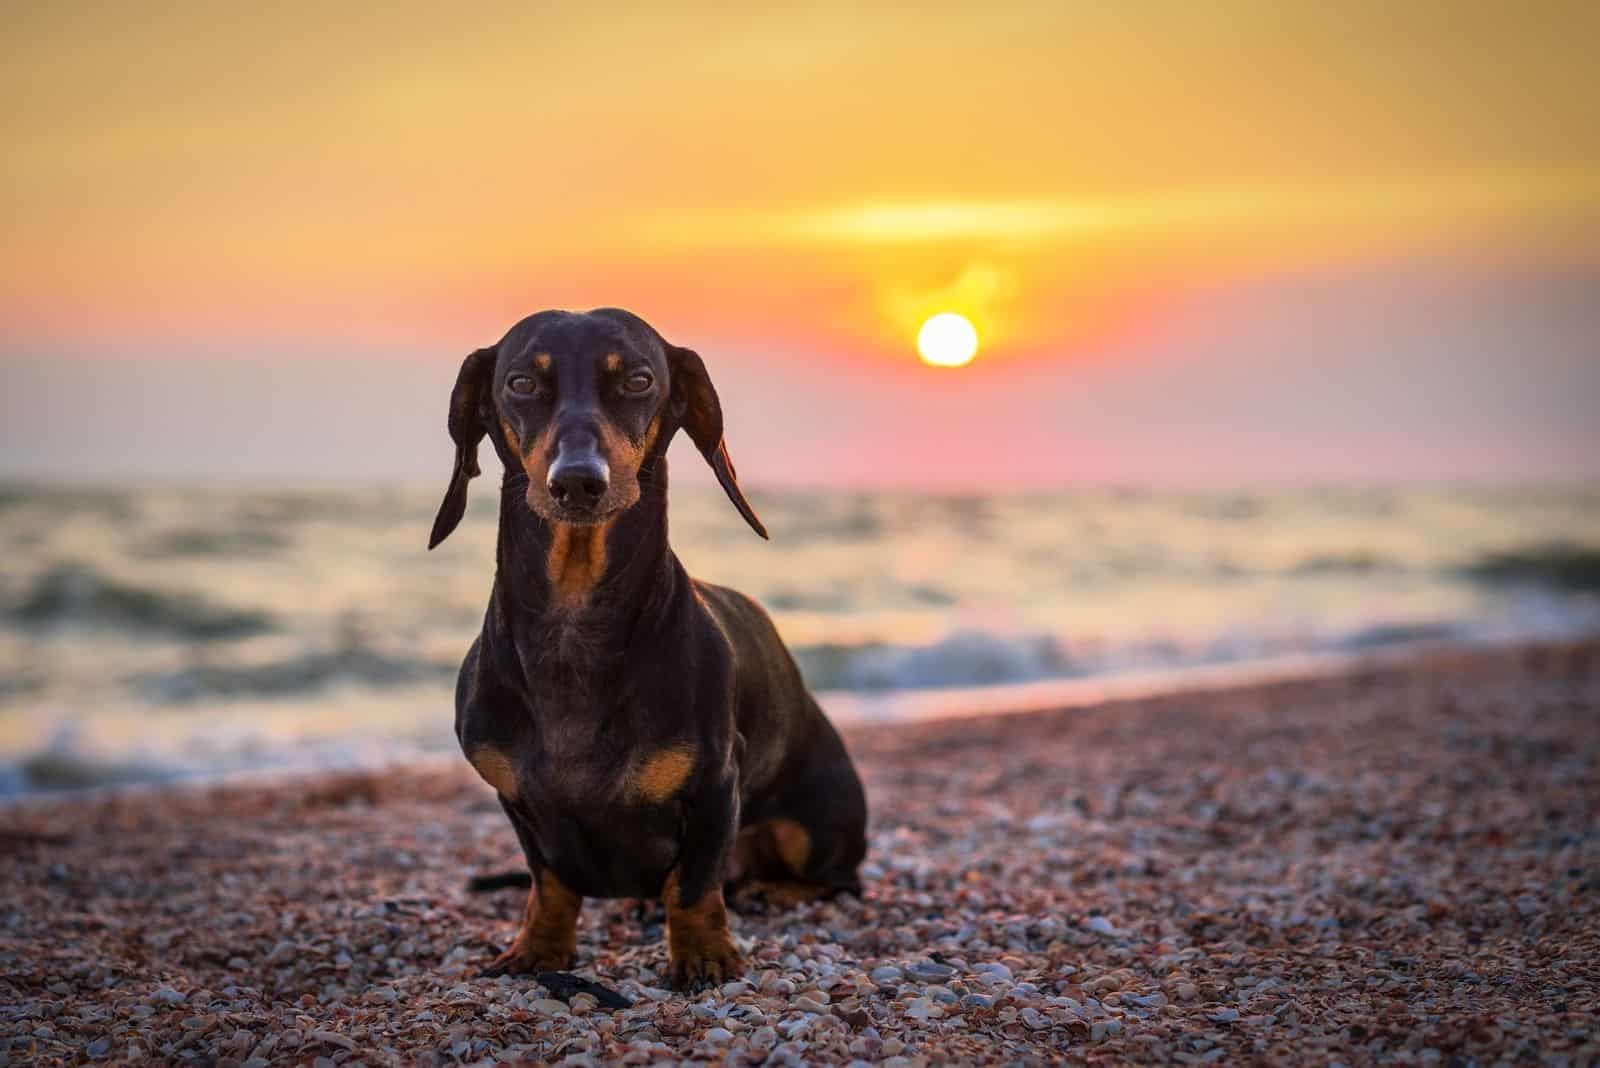 portrait dog breed dachshund, black and tan, against the setting sun on the beach in summer